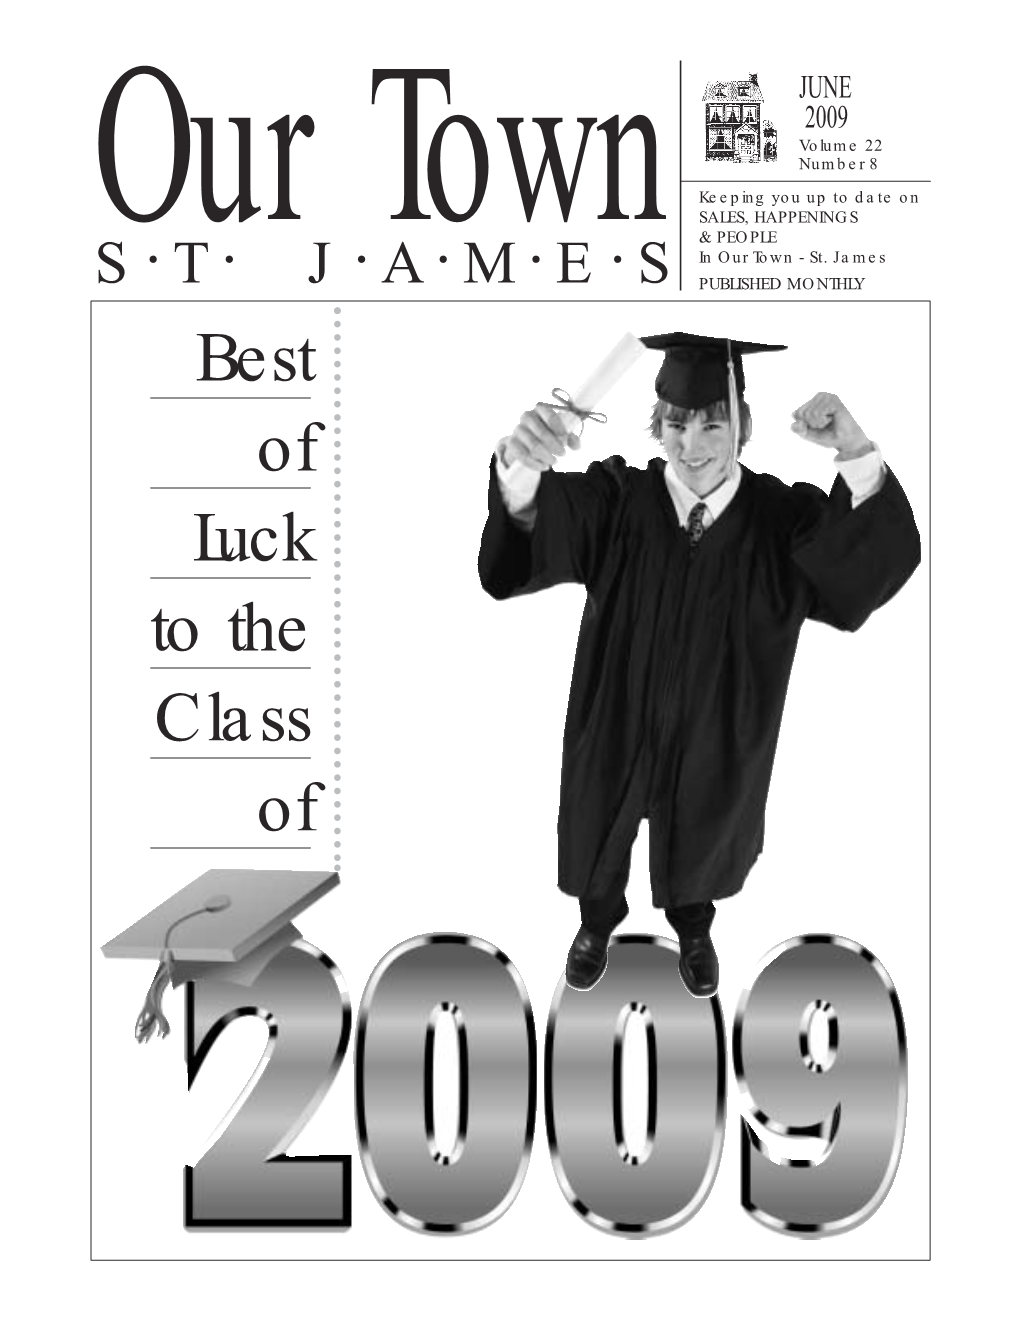 JUNE 2009 Volume 22 Number 8 Keeping You up to Date on SALES, HAPPENINGS Our Town & PEOPLE • • • • • • in Our Town - St